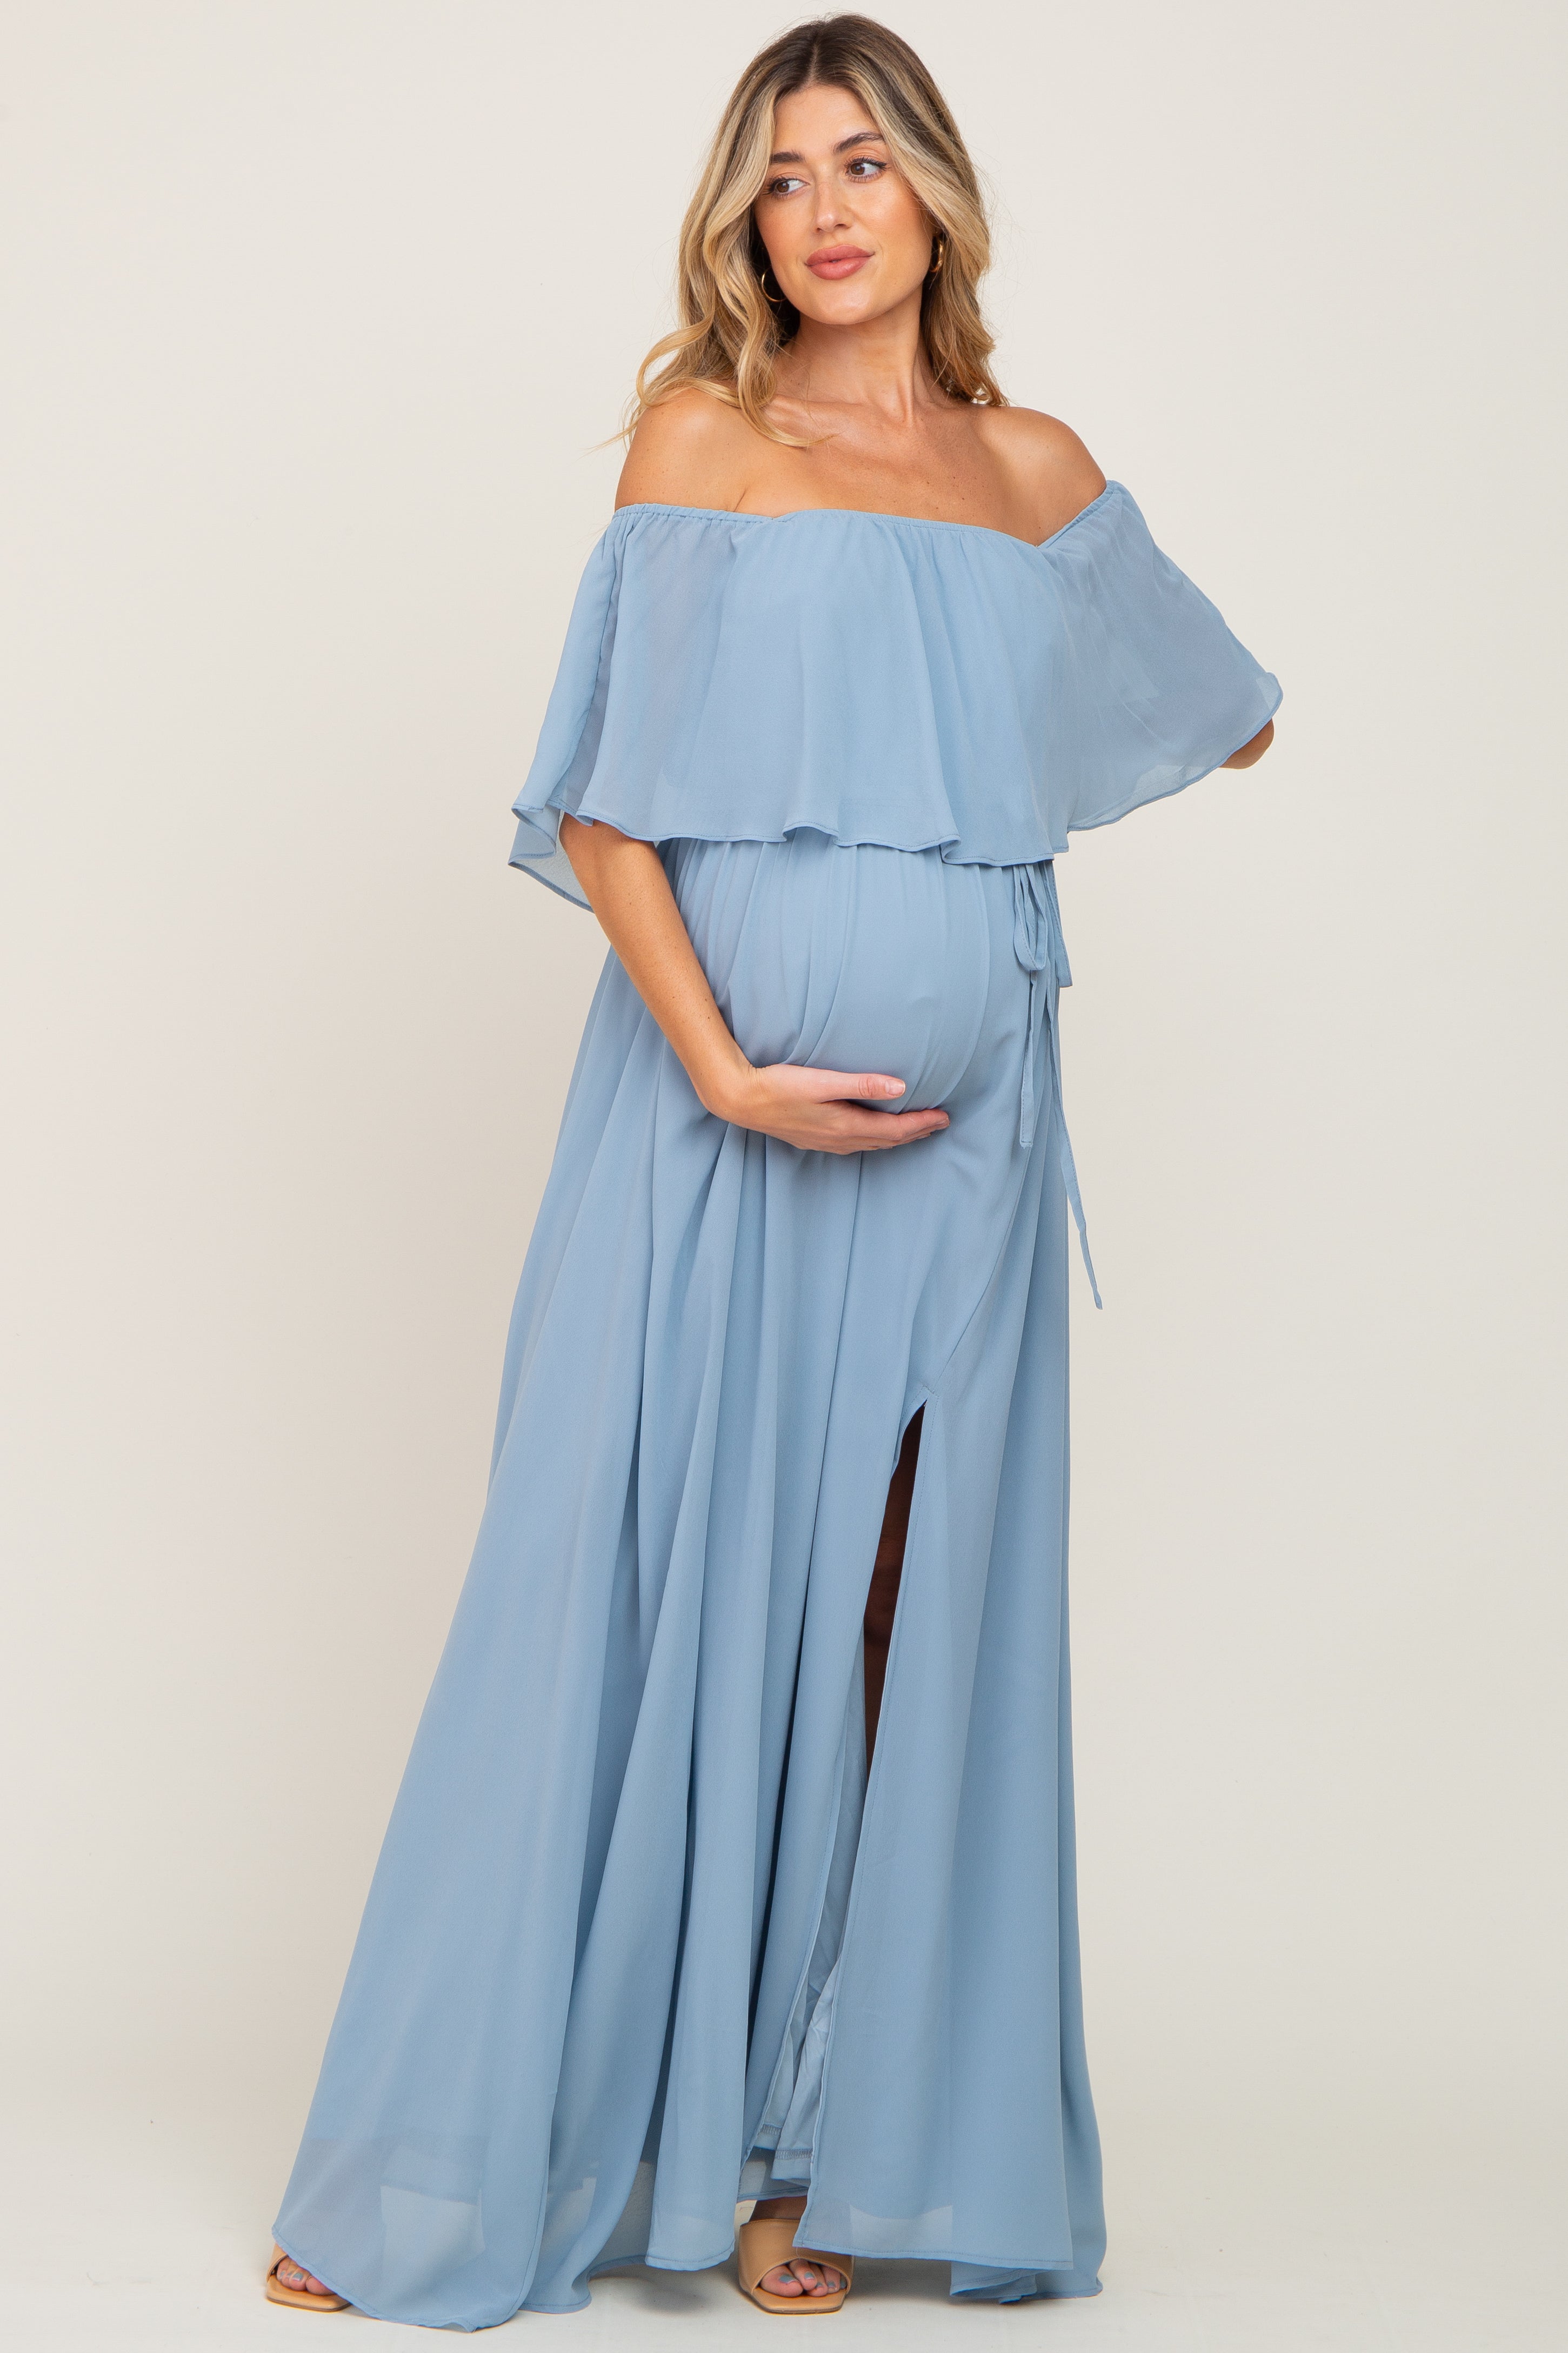 SBYOJLPB Summer Maternity Clothes Women off Shoulder Pregnants Sexy  Photography Ruffled Nursing Long Dress Reduced Price Blue L